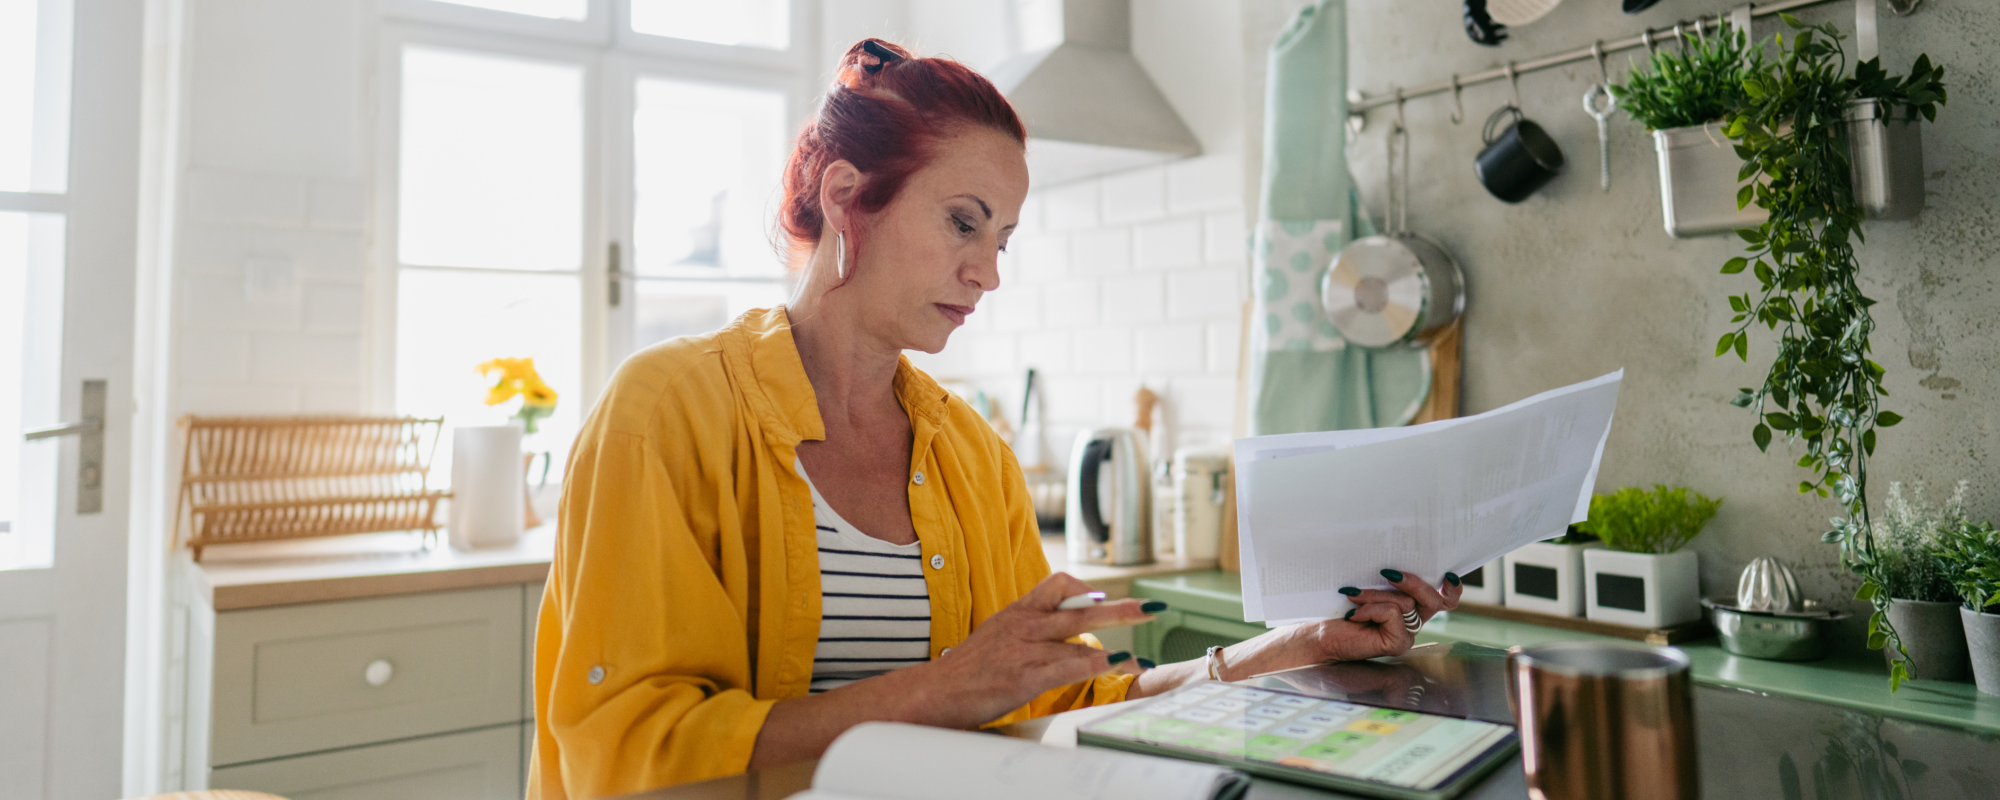 Woman reviewing her tax documents in her kitchen